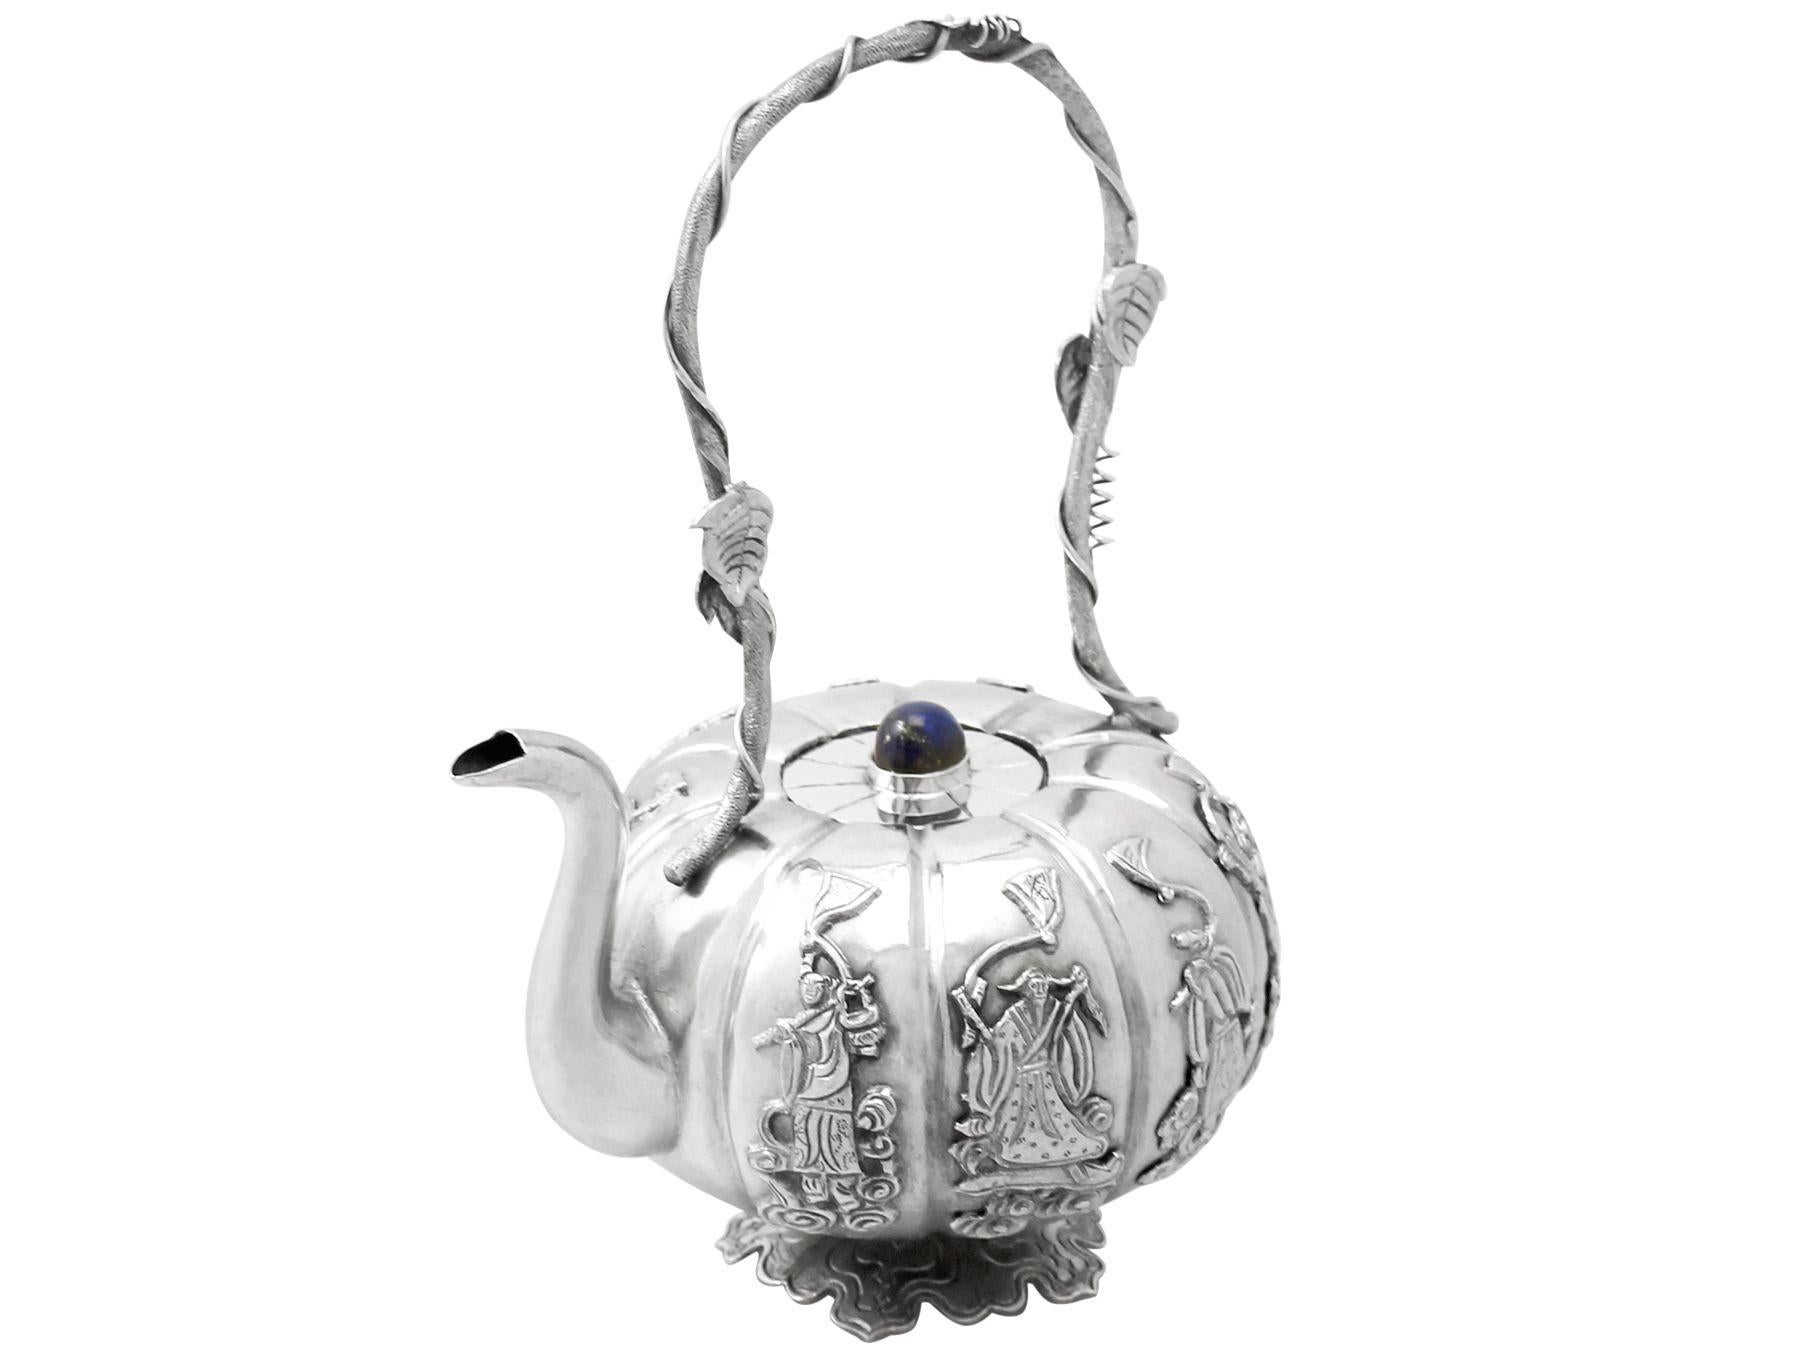 Antique Iraqi Silver and Lapis Lazuli Miniature Teapot, circa 1920 In Good Condition For Sale In Jesmond, Newcastle Upon Tyne